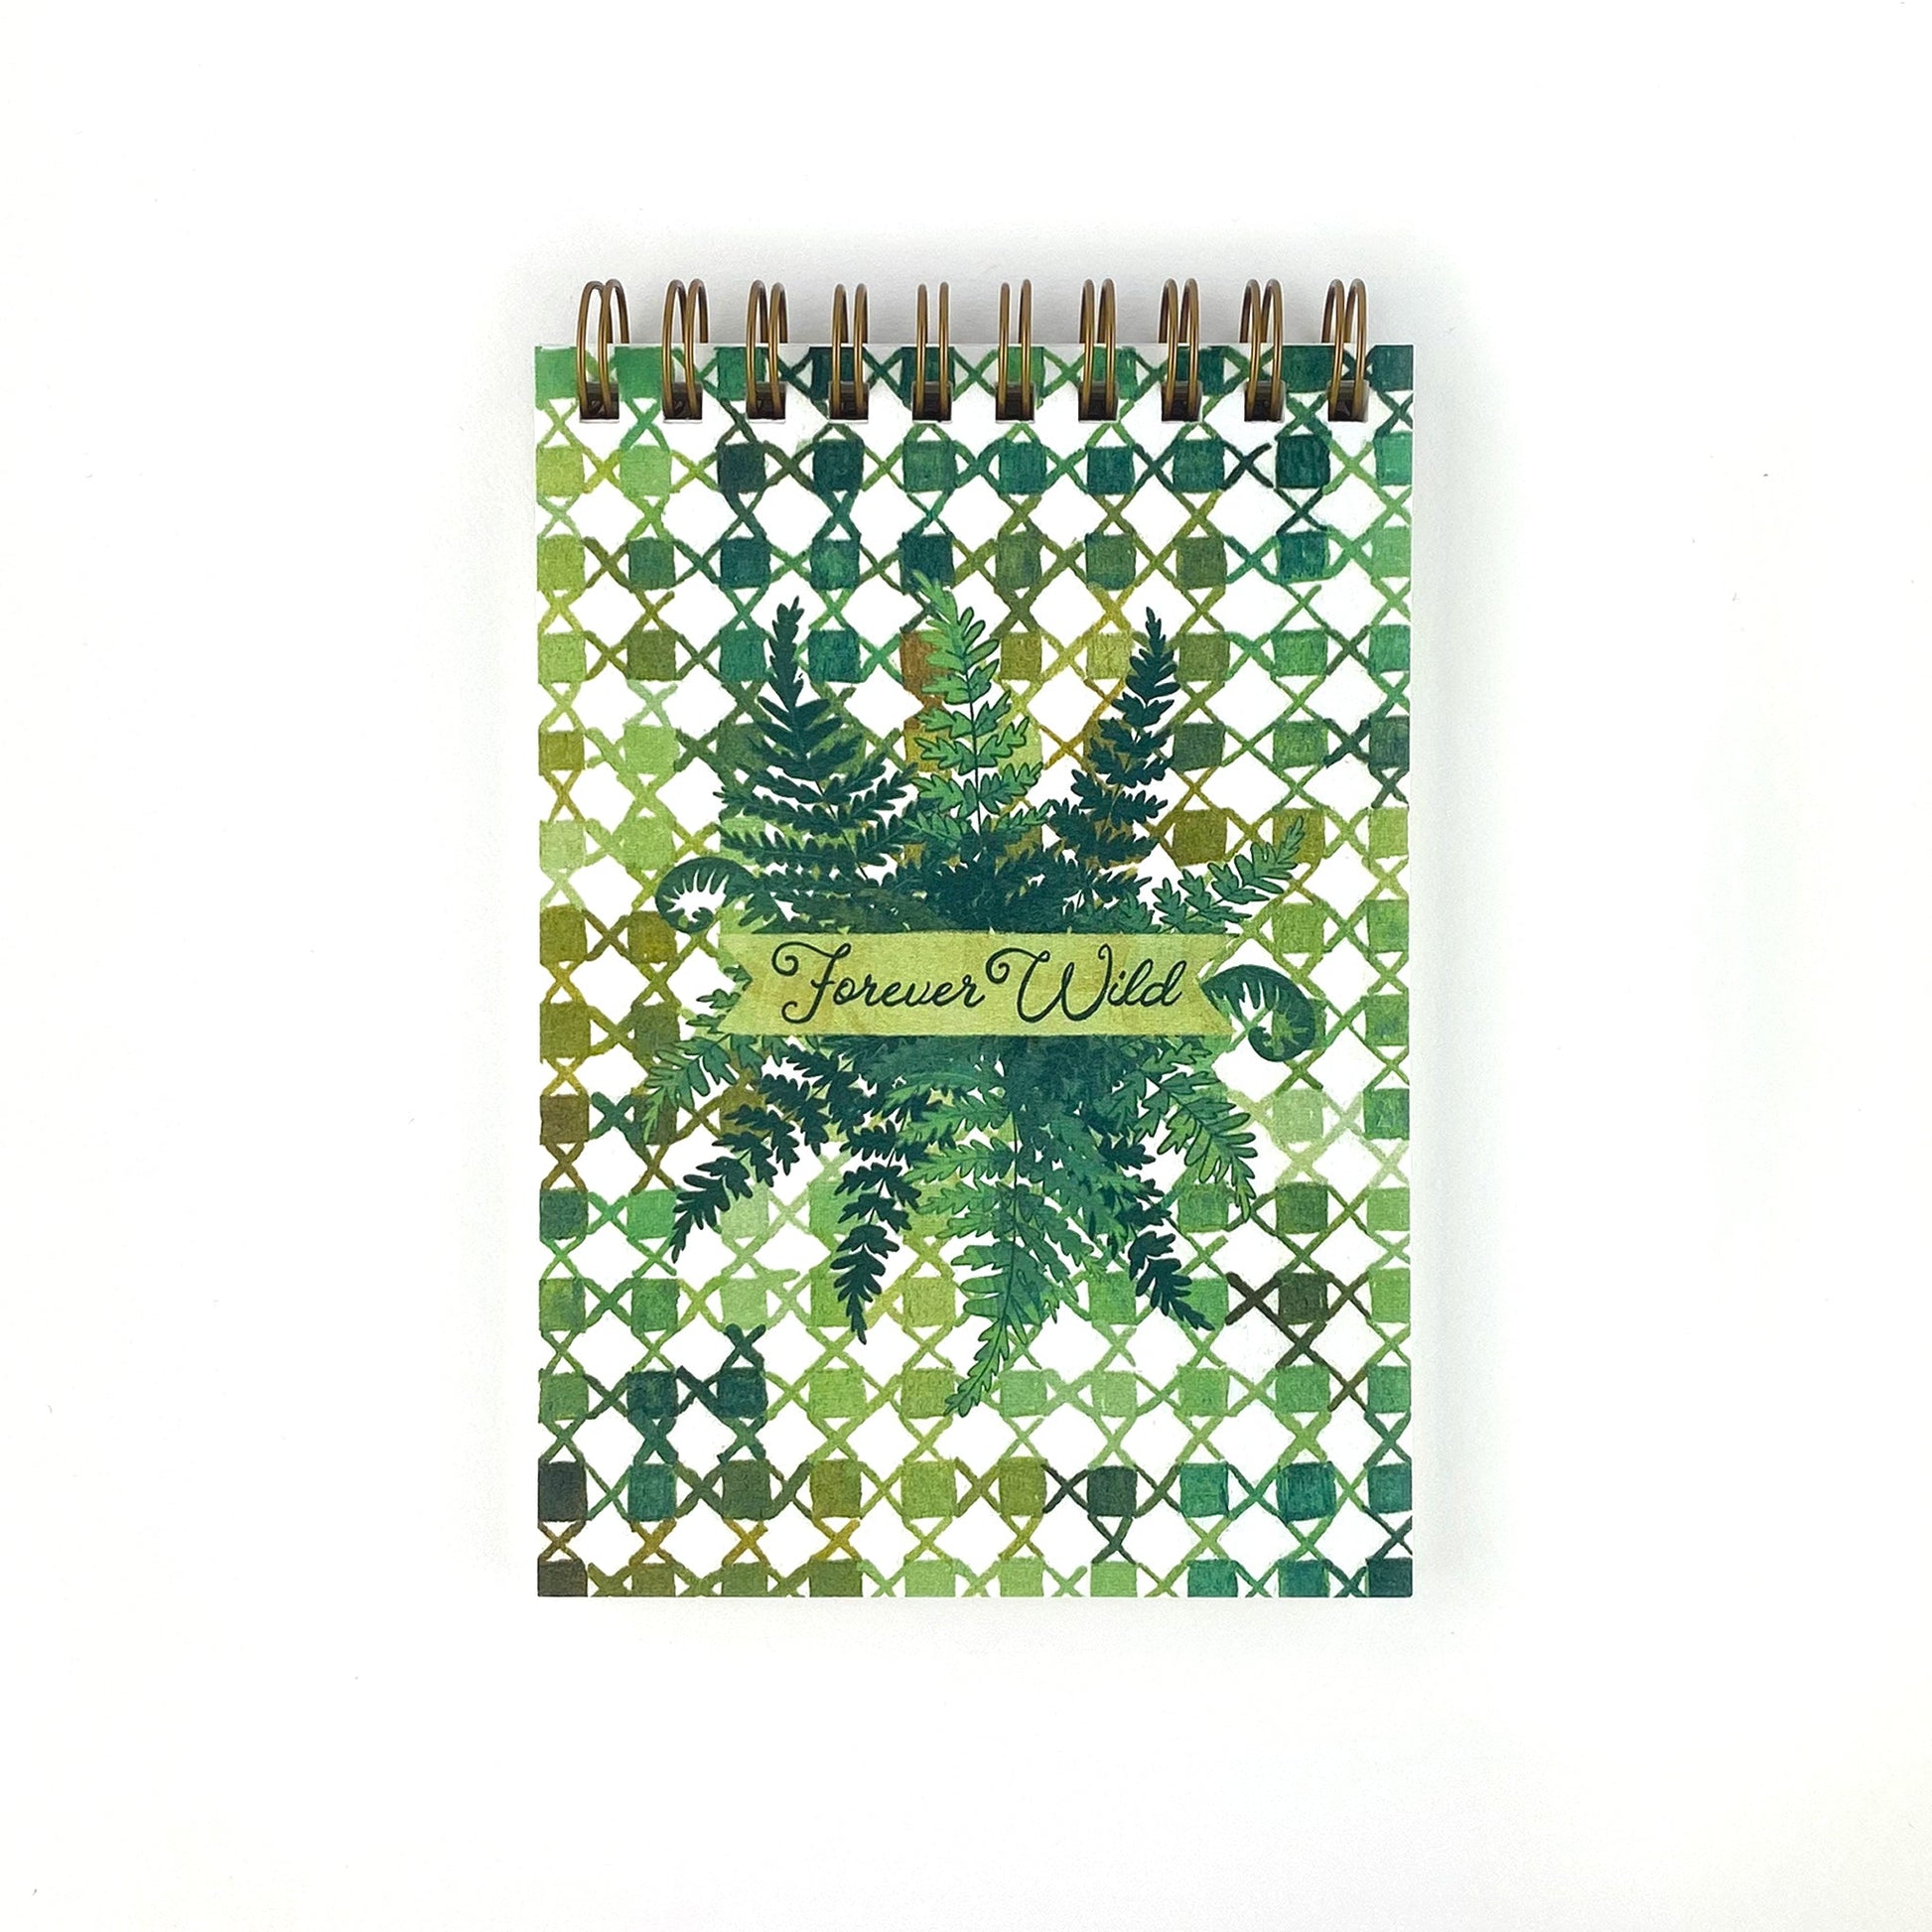 Spiral Bound Notebook with hand painted green checkers and x's. In the center are wild green ferns and the worlds hand lettered "Forever Wild"